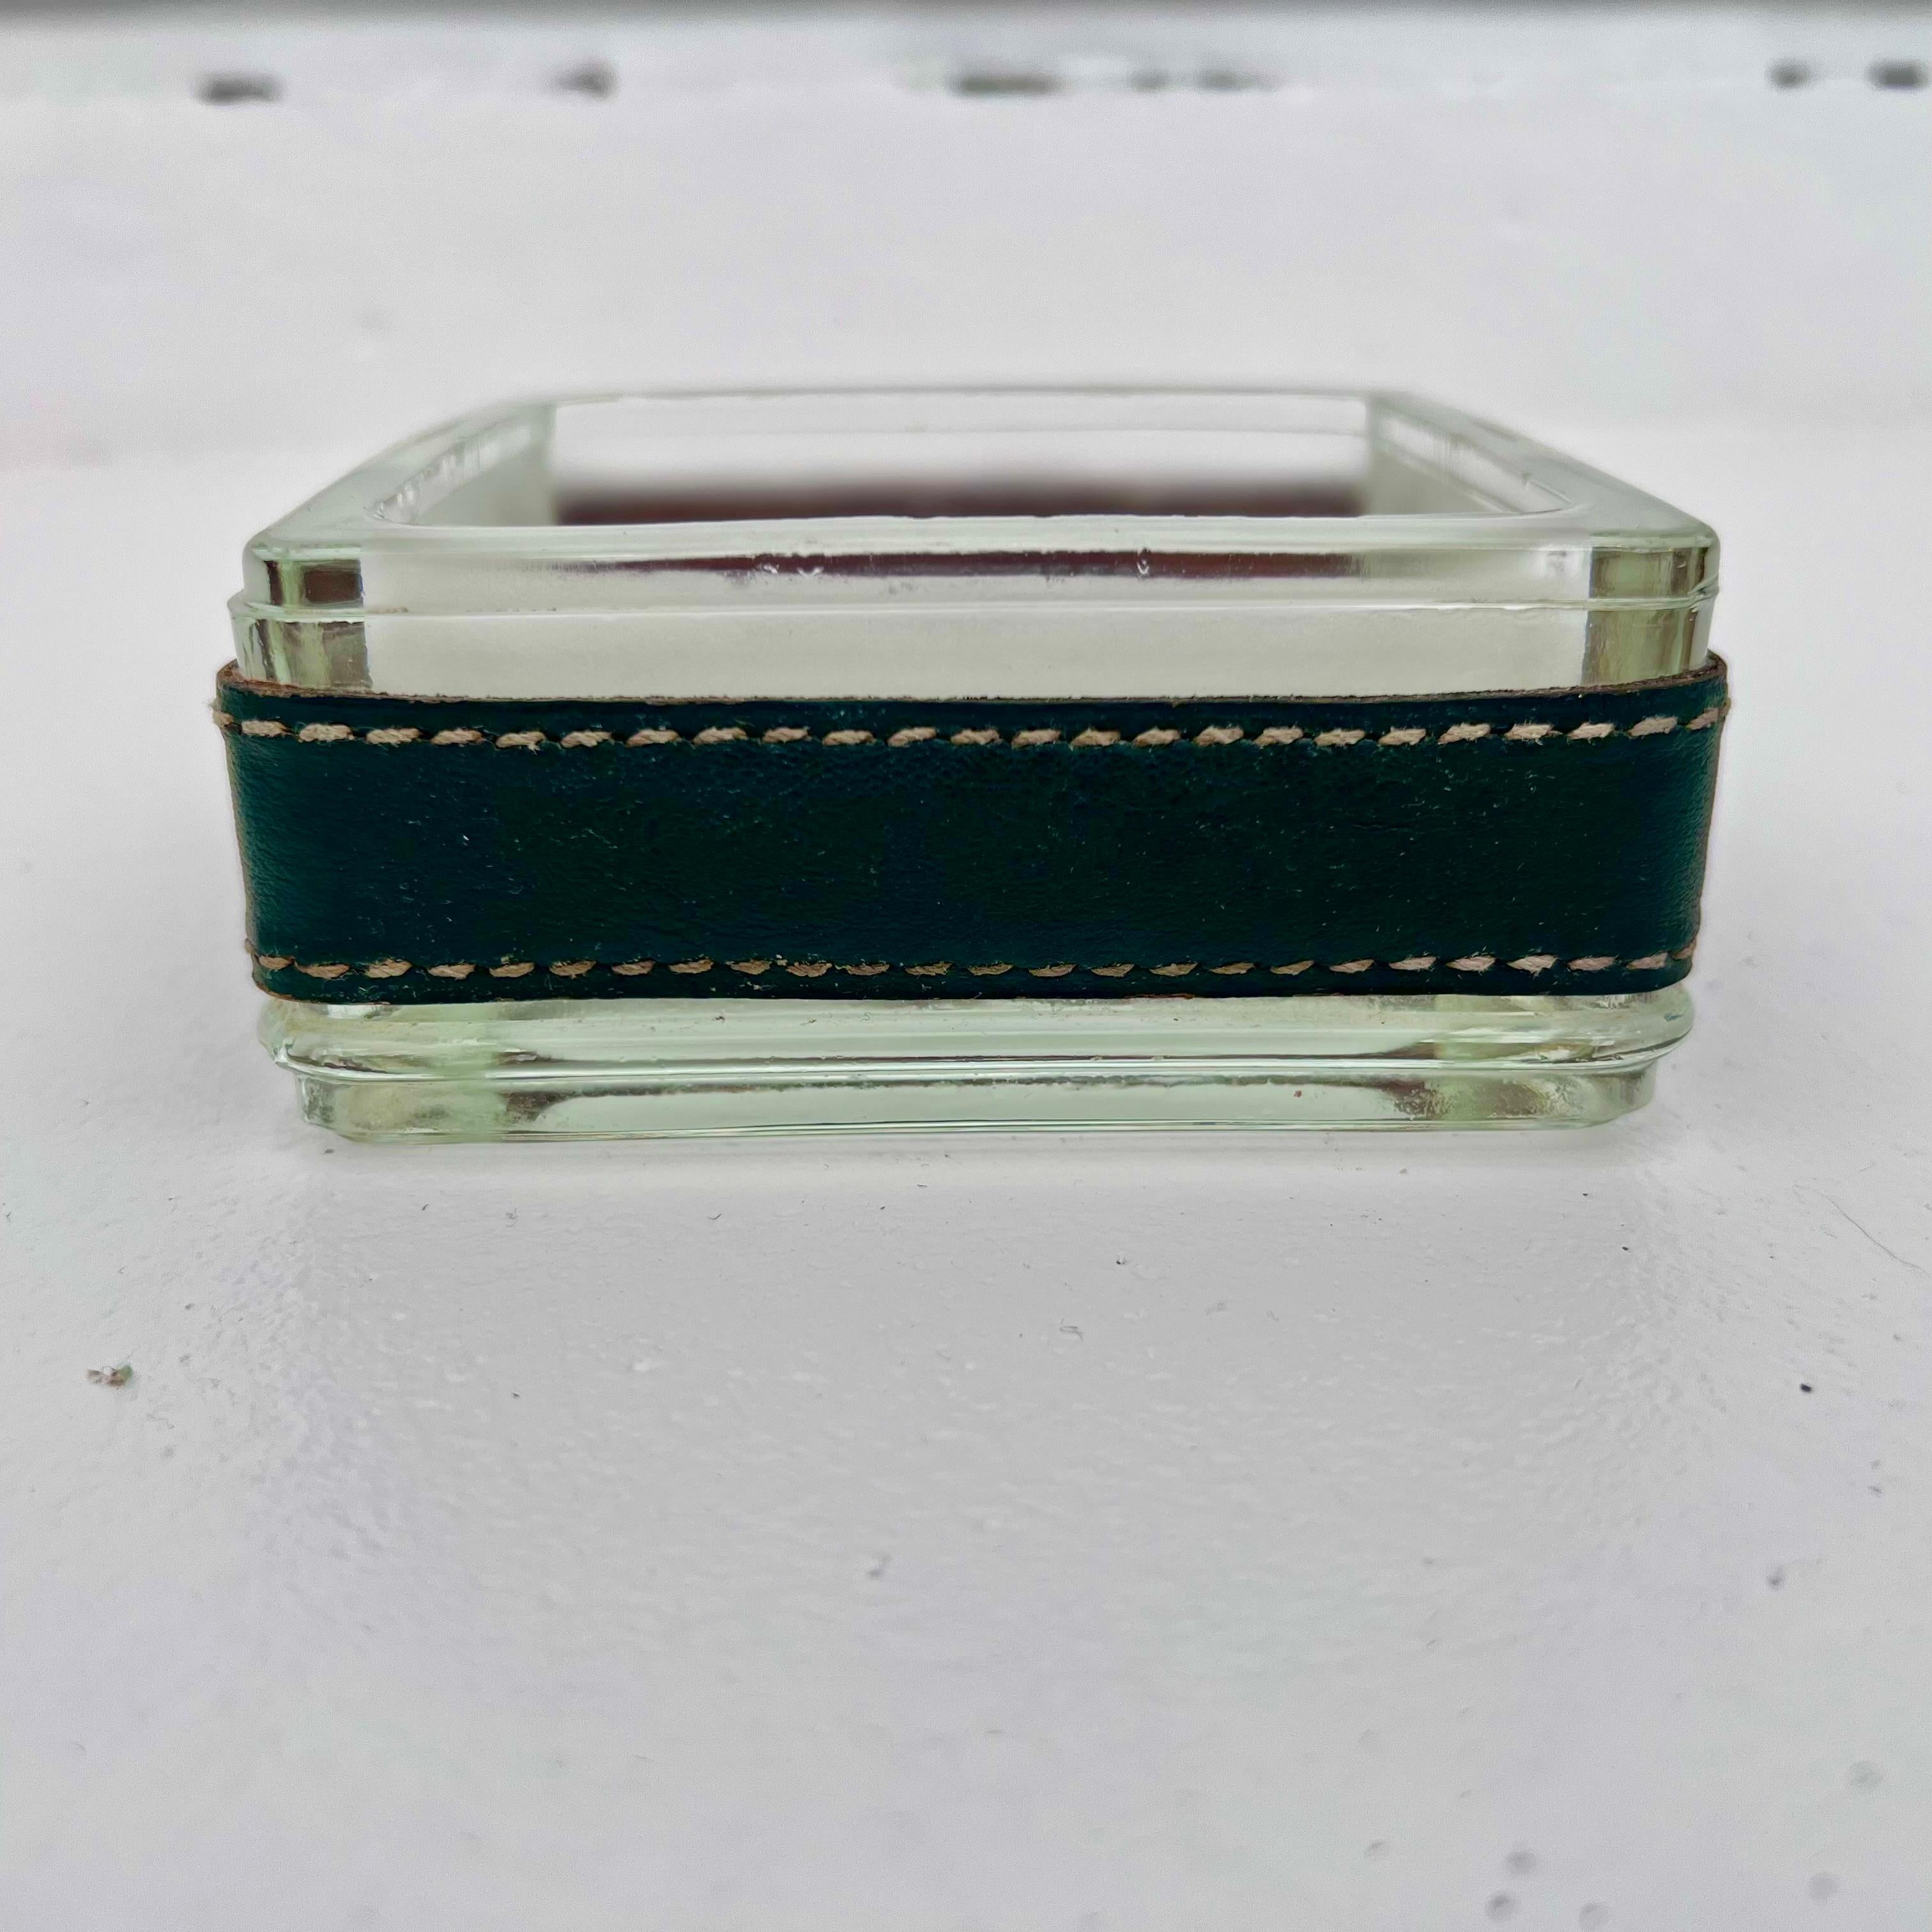 Handsome green leather and frosted glass ashtray from the 1950s by seminal French Art Deco modernist designer Jacques Adnet. The inside part of the glass receiver is frosted and surrounded with a green textured leather strap with Adnet's signature